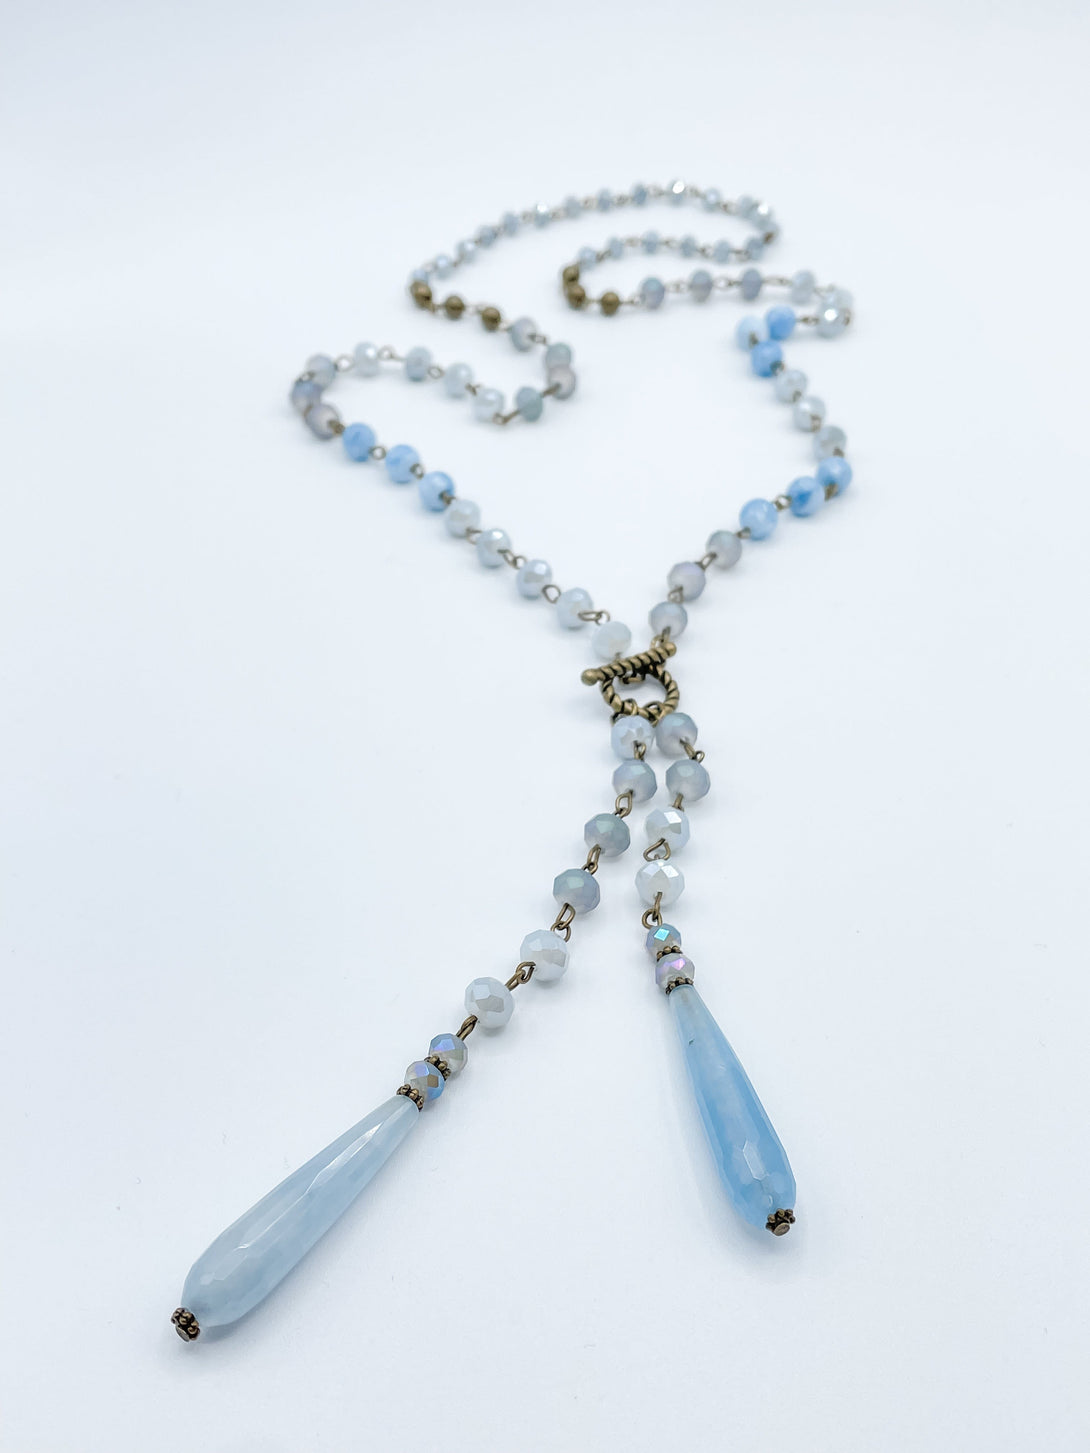 Long Beaded Necklace with Two Crystal Drop Features